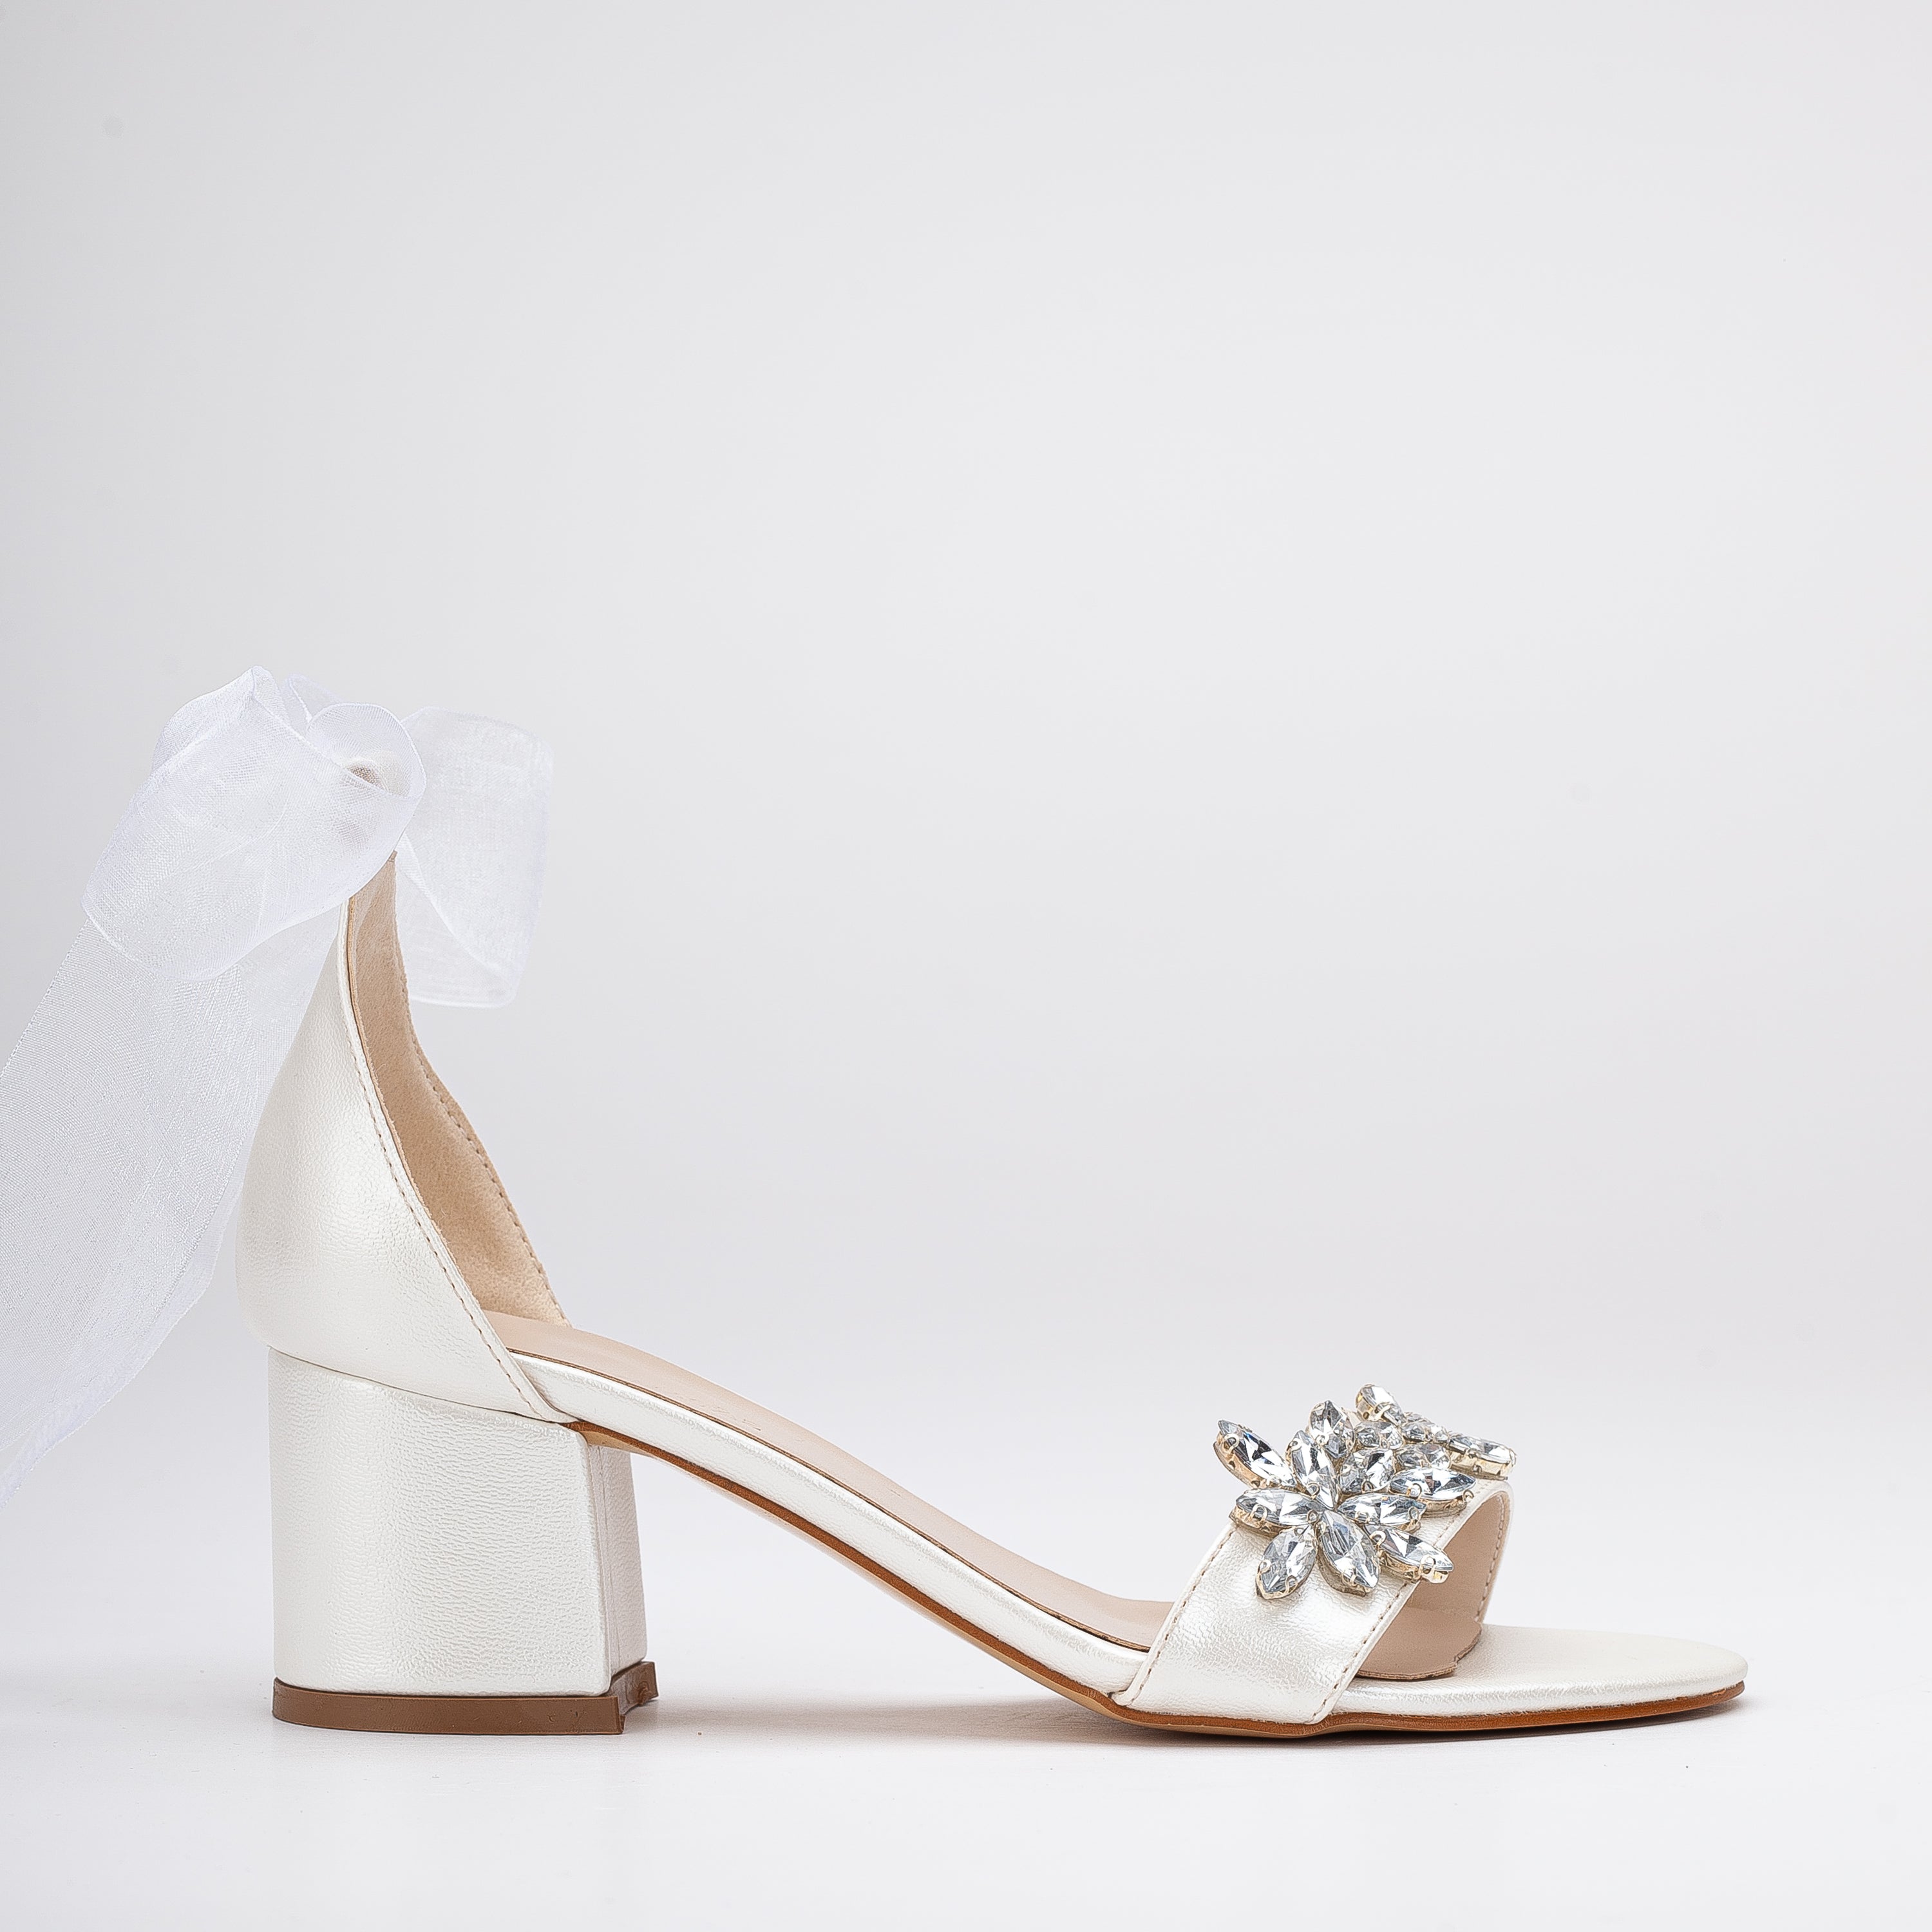 Wedding Shoes with Rhinestone and Ribbon, Bridal Shoes, Wedding Block Heels, Wedding Low Heels, Bridal Shoes, Ivory Block Heels, Shoes for Bride, Bridal Heels, Wedding Flats, Wedding Shoes for Bride, Bride Shoes, Bridal Flats, Bride Sandals, Rhinestone Wedding Shoes, Princess Wedding Shoes